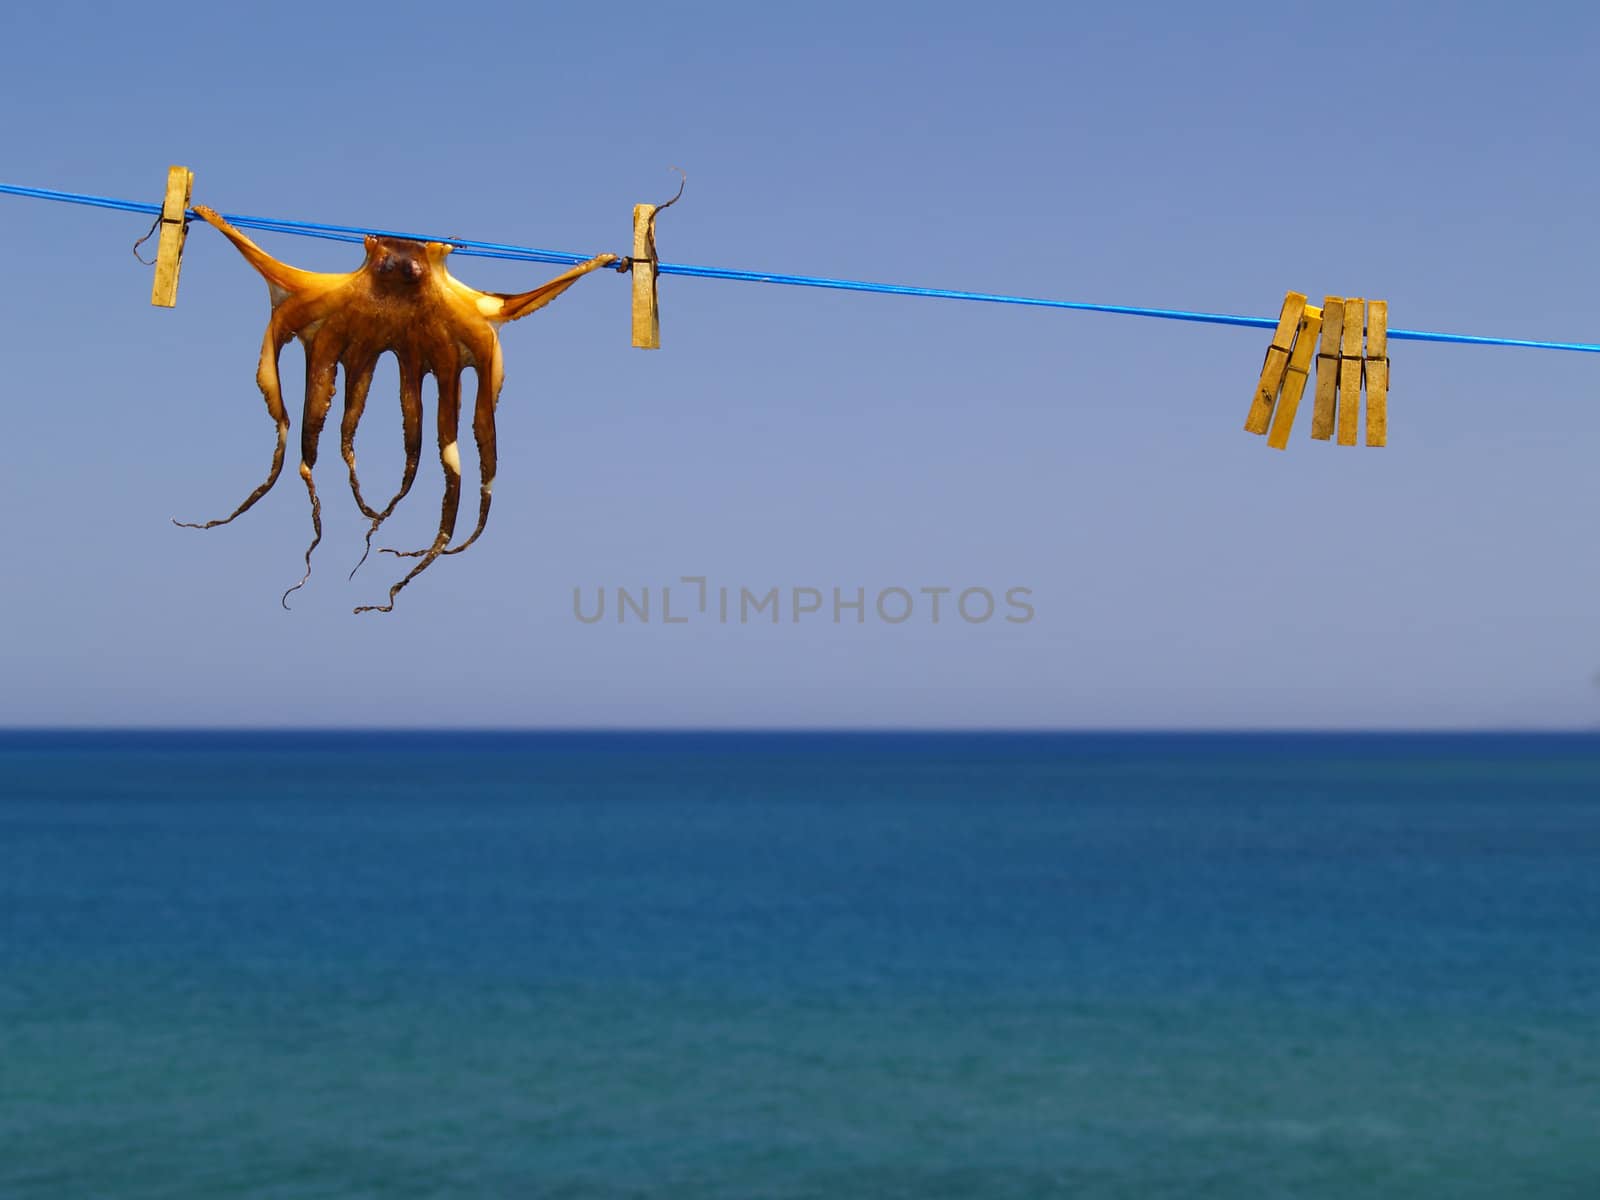 cuttlefish drying on the clothesline